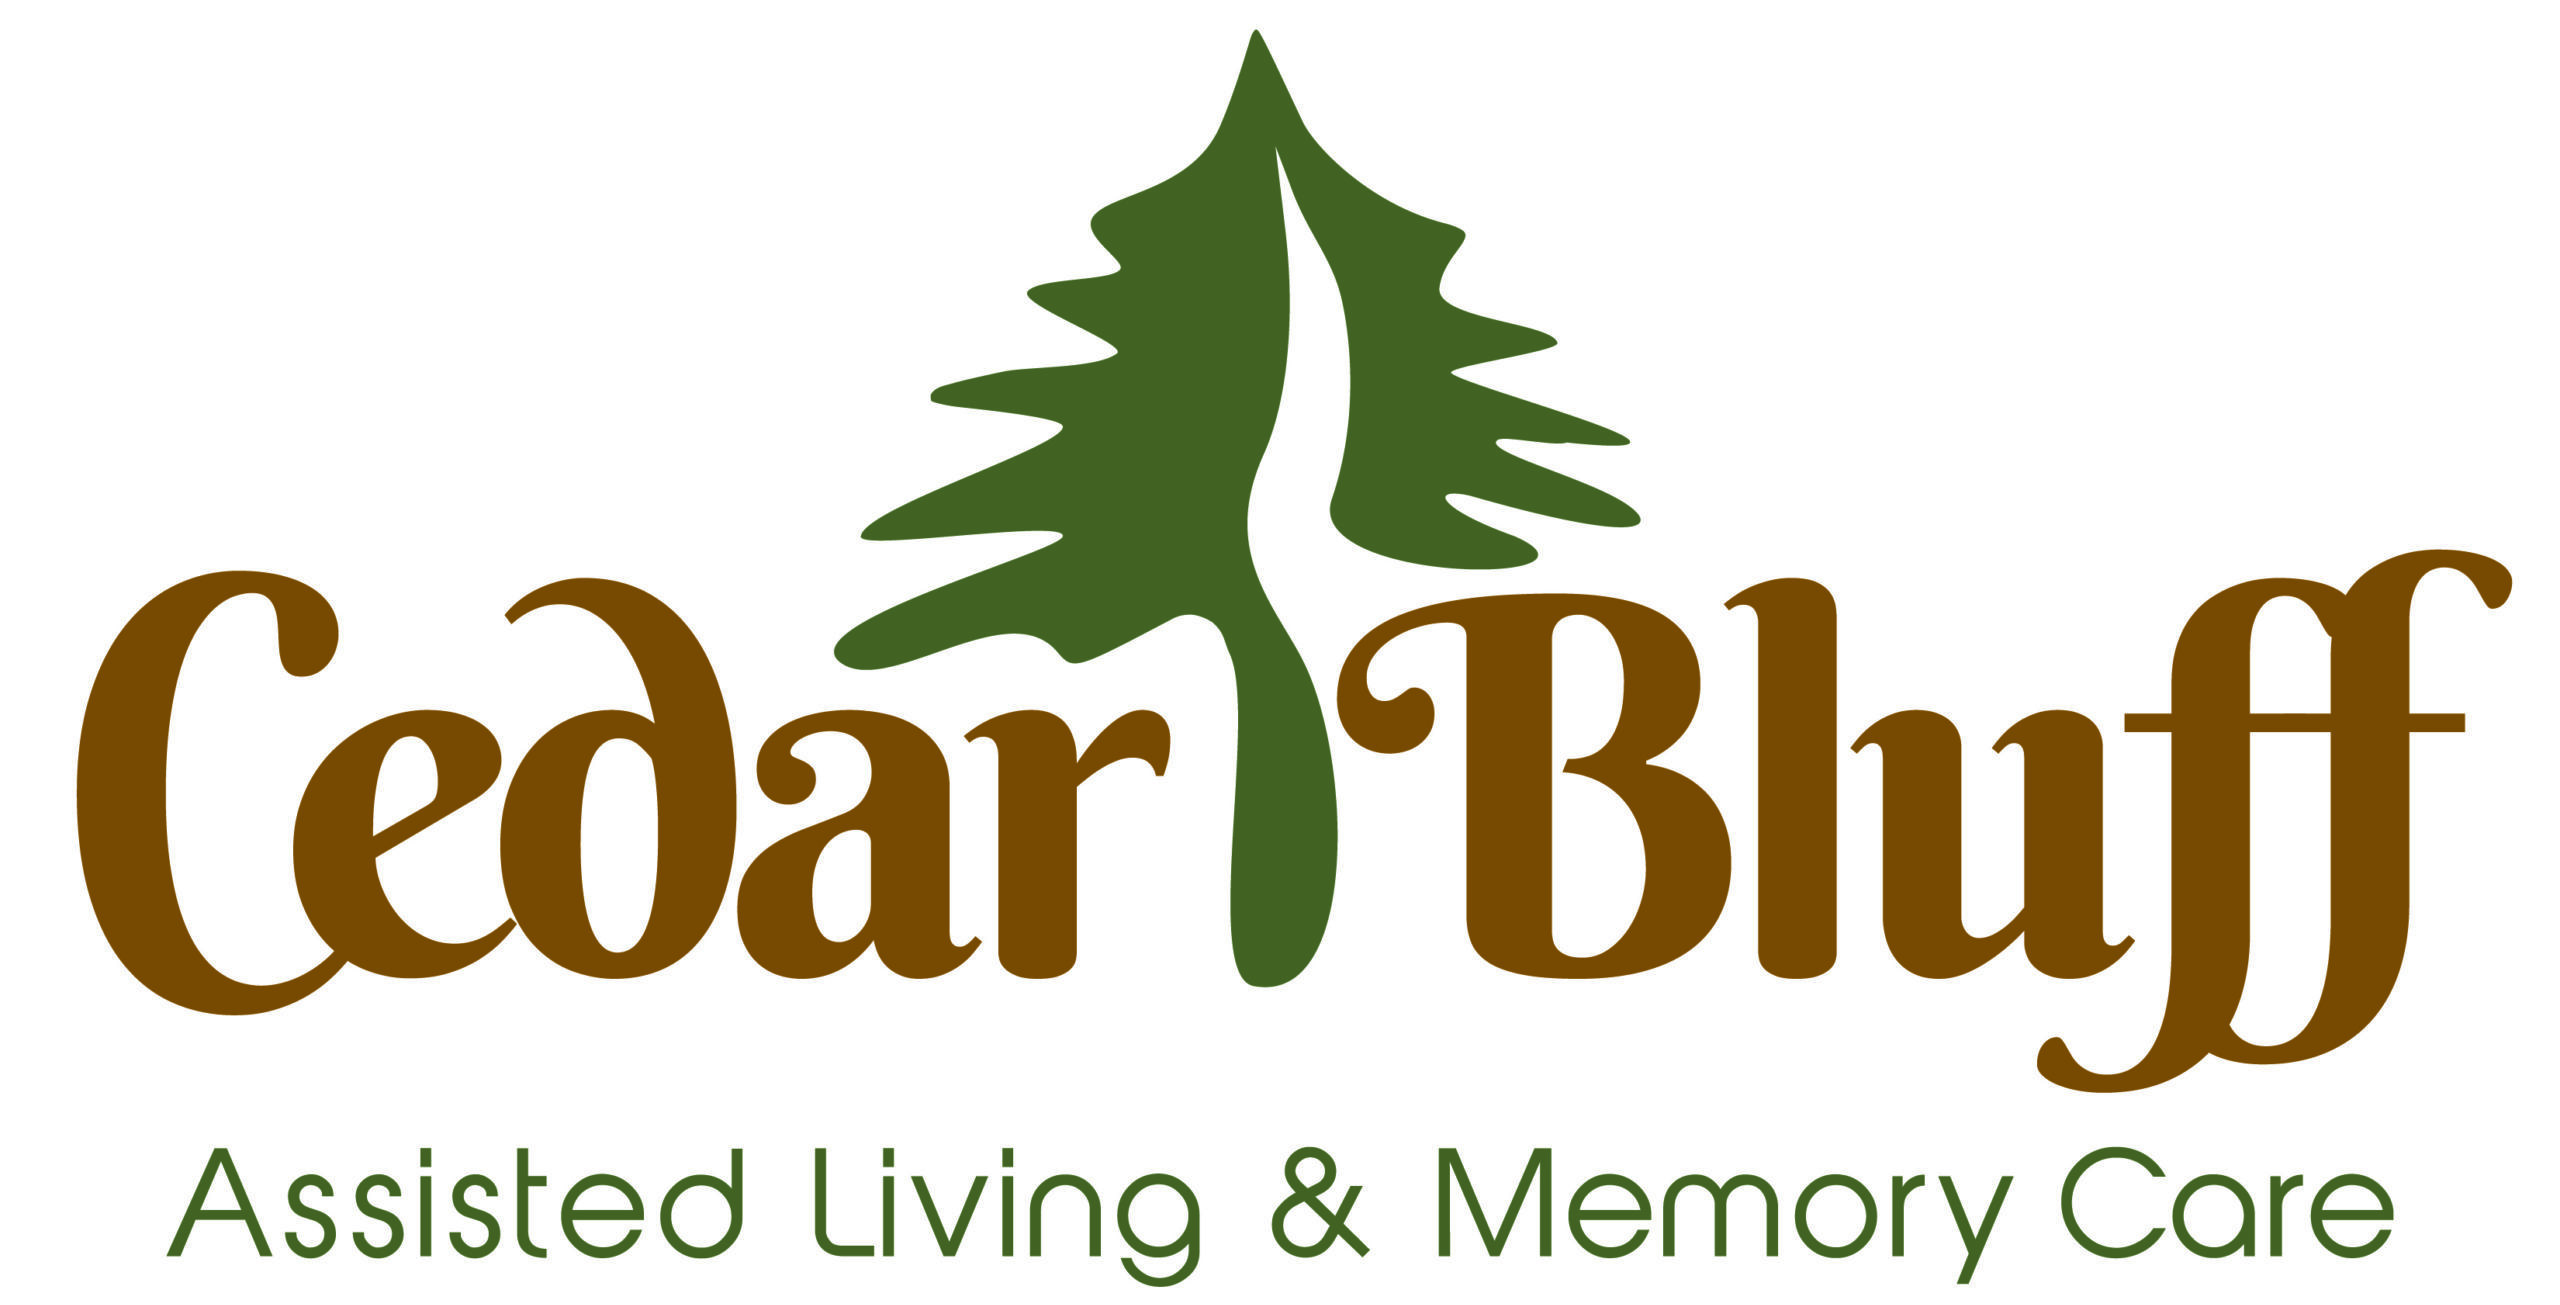 Cedar Bluff: Assisted Living & Memory Care in Mansfield, TX